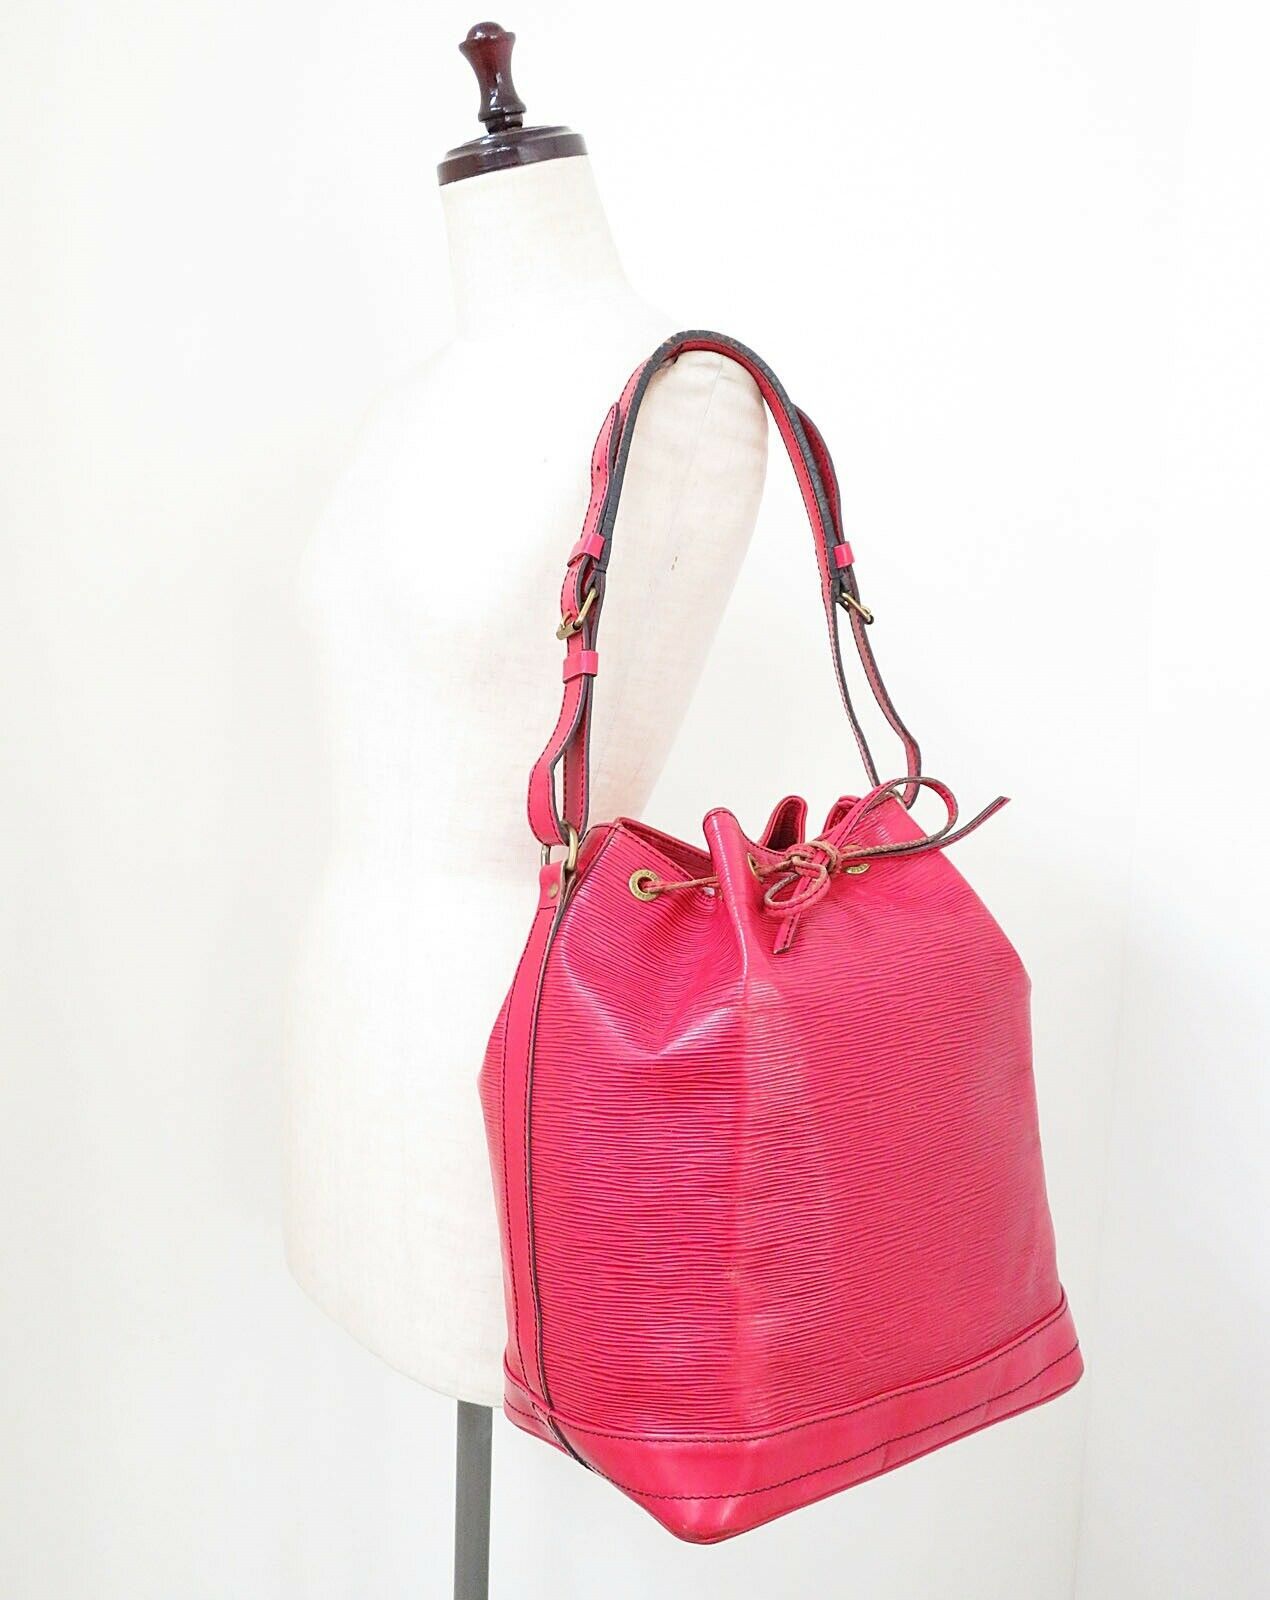 Authentic LOUIS VUITTON Noe Red Epi Leather Shoulder Tote ...